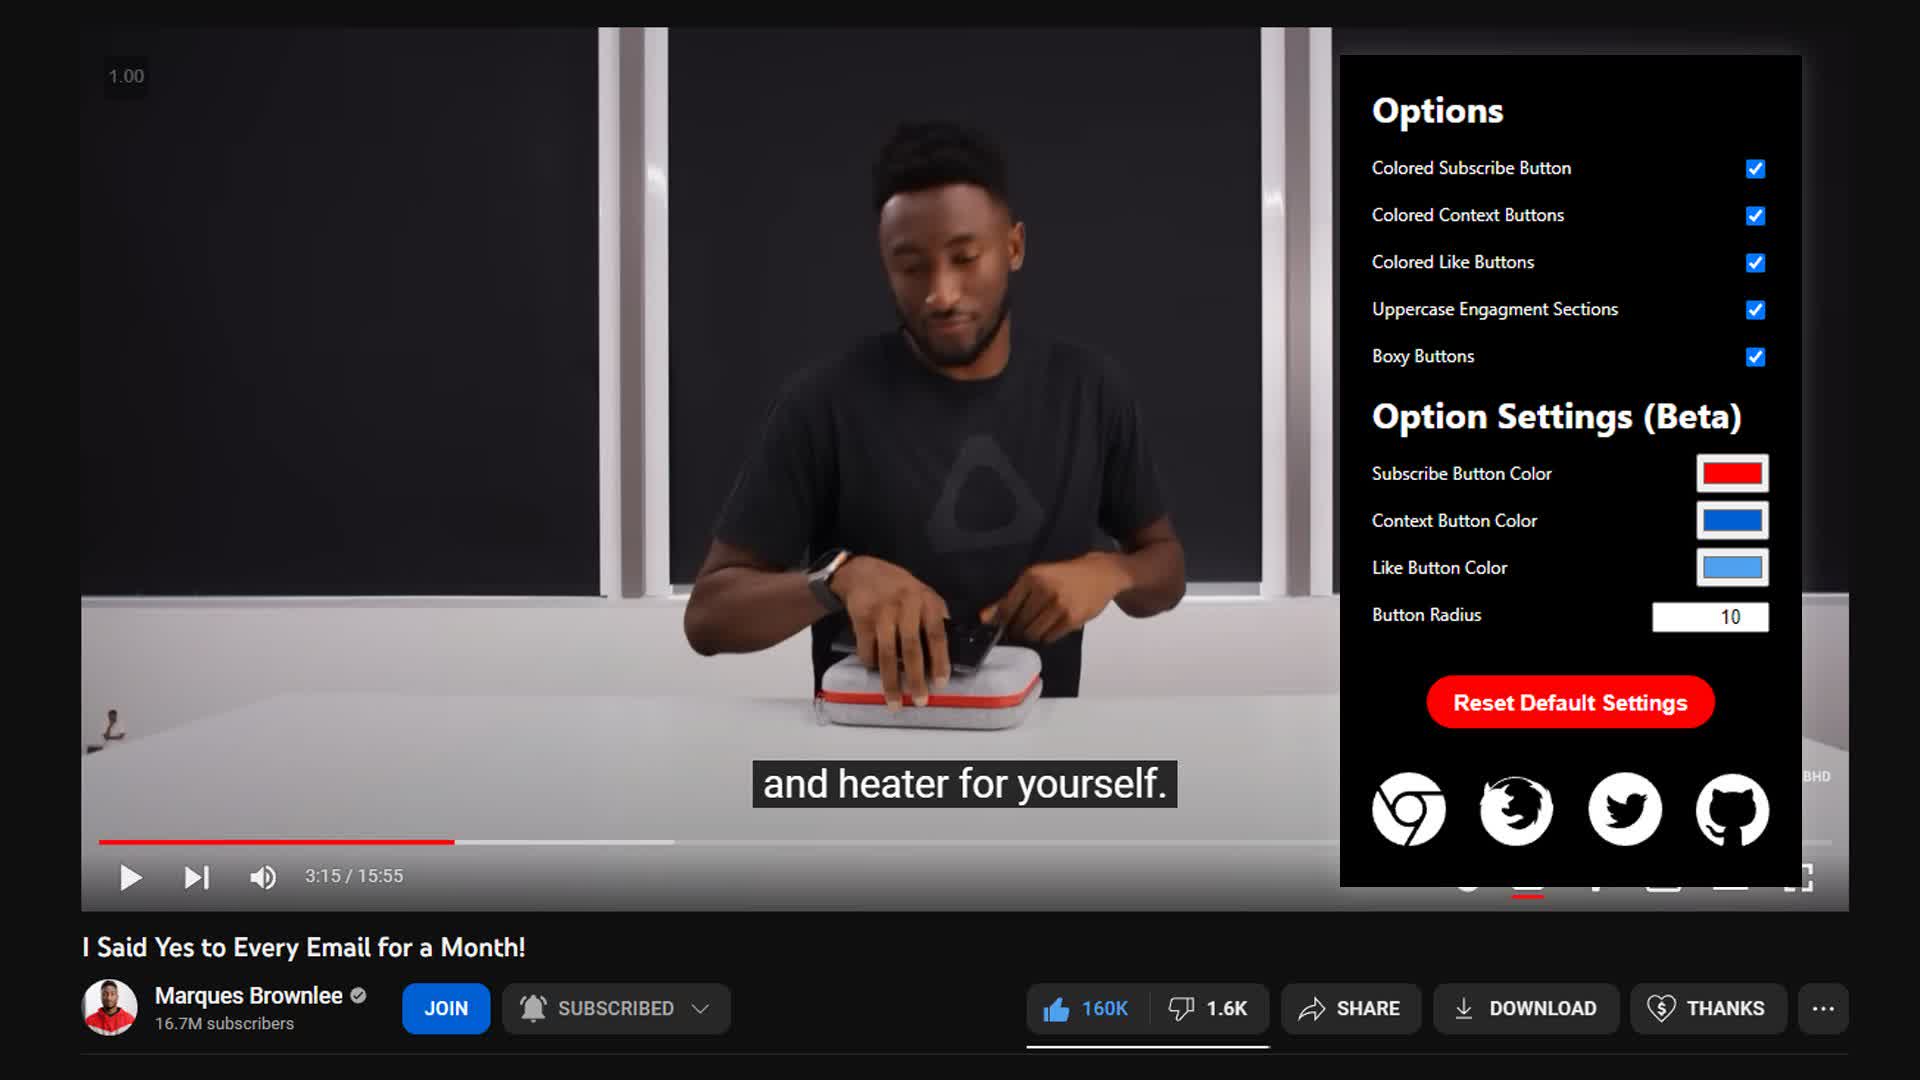 MKBHD's youtube channel, showcasing the red subscribe button chrome extension made by Damien DavisNeff.